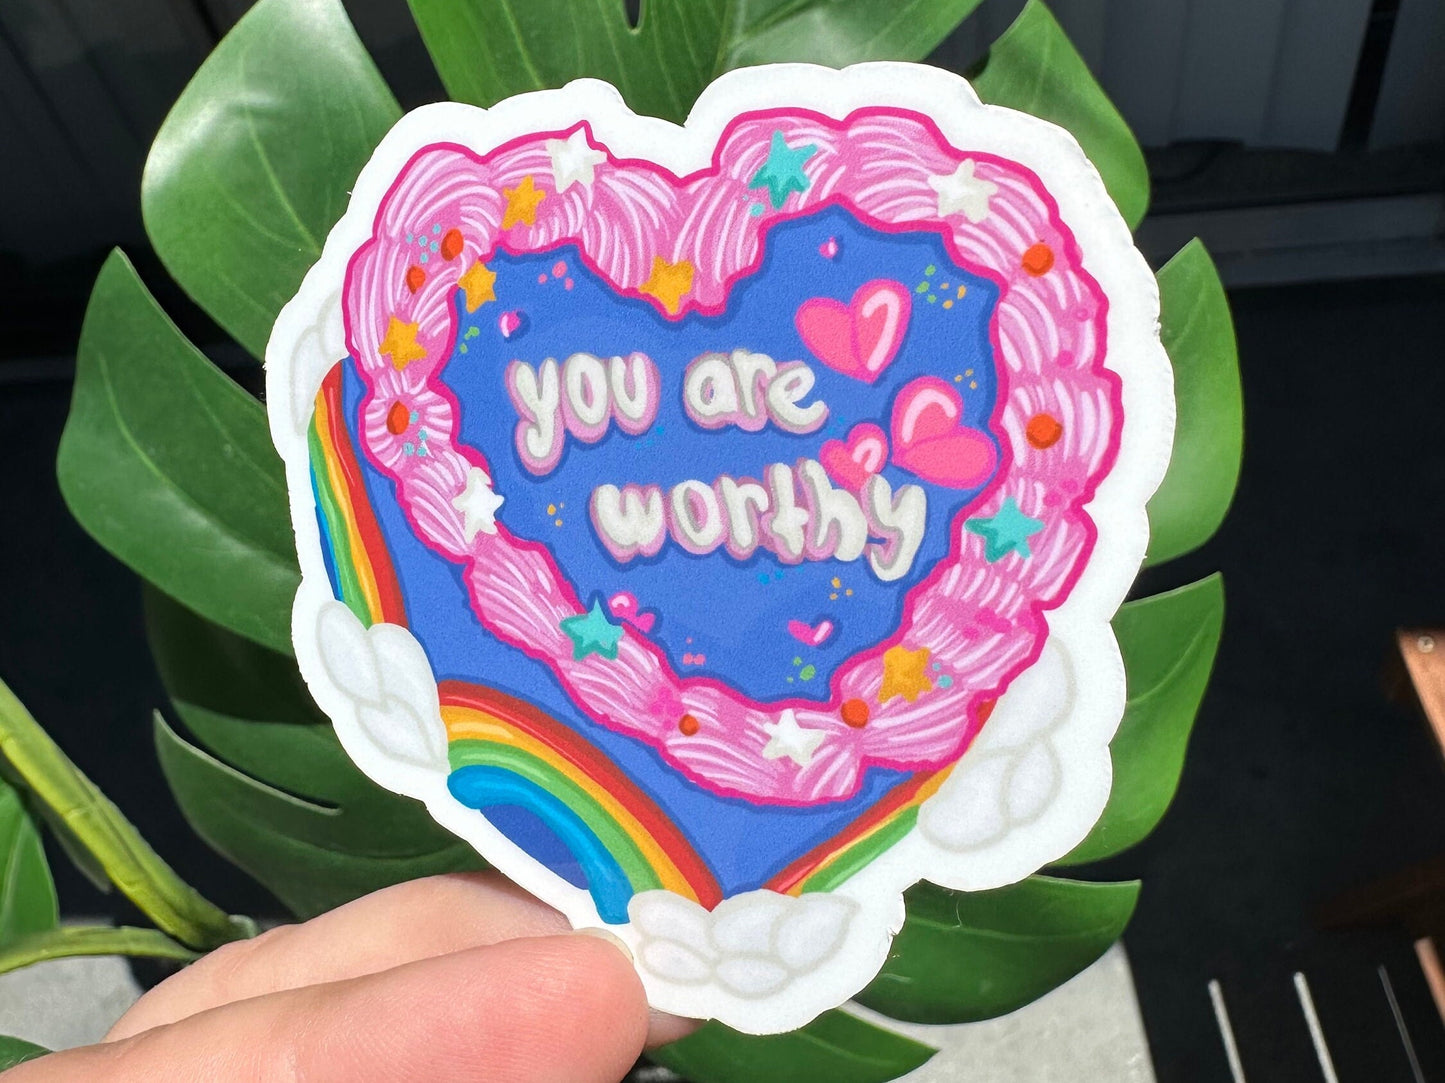 You Are Worthy Sticker, Vintage Heart Cake, Cute Trendy, Self Love, Feminist Vibes, Inspirational Quote, Eating Disorder Recovery, Foodie